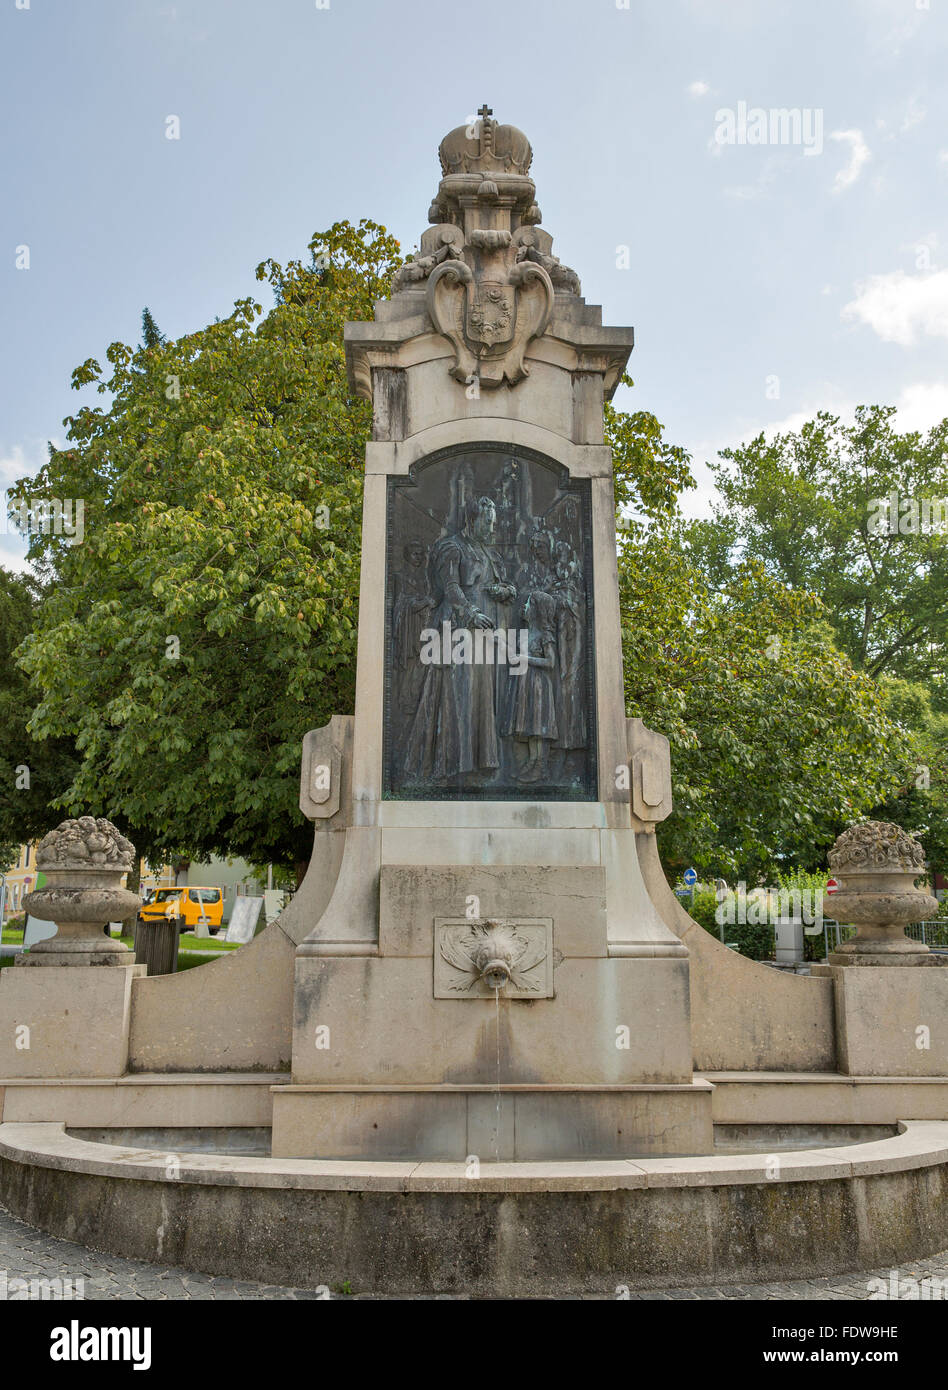 Religious monument with fountain near St. Michael Basilica (formerly Collegiate Church) at Mondsee, Austria. Stock Photo